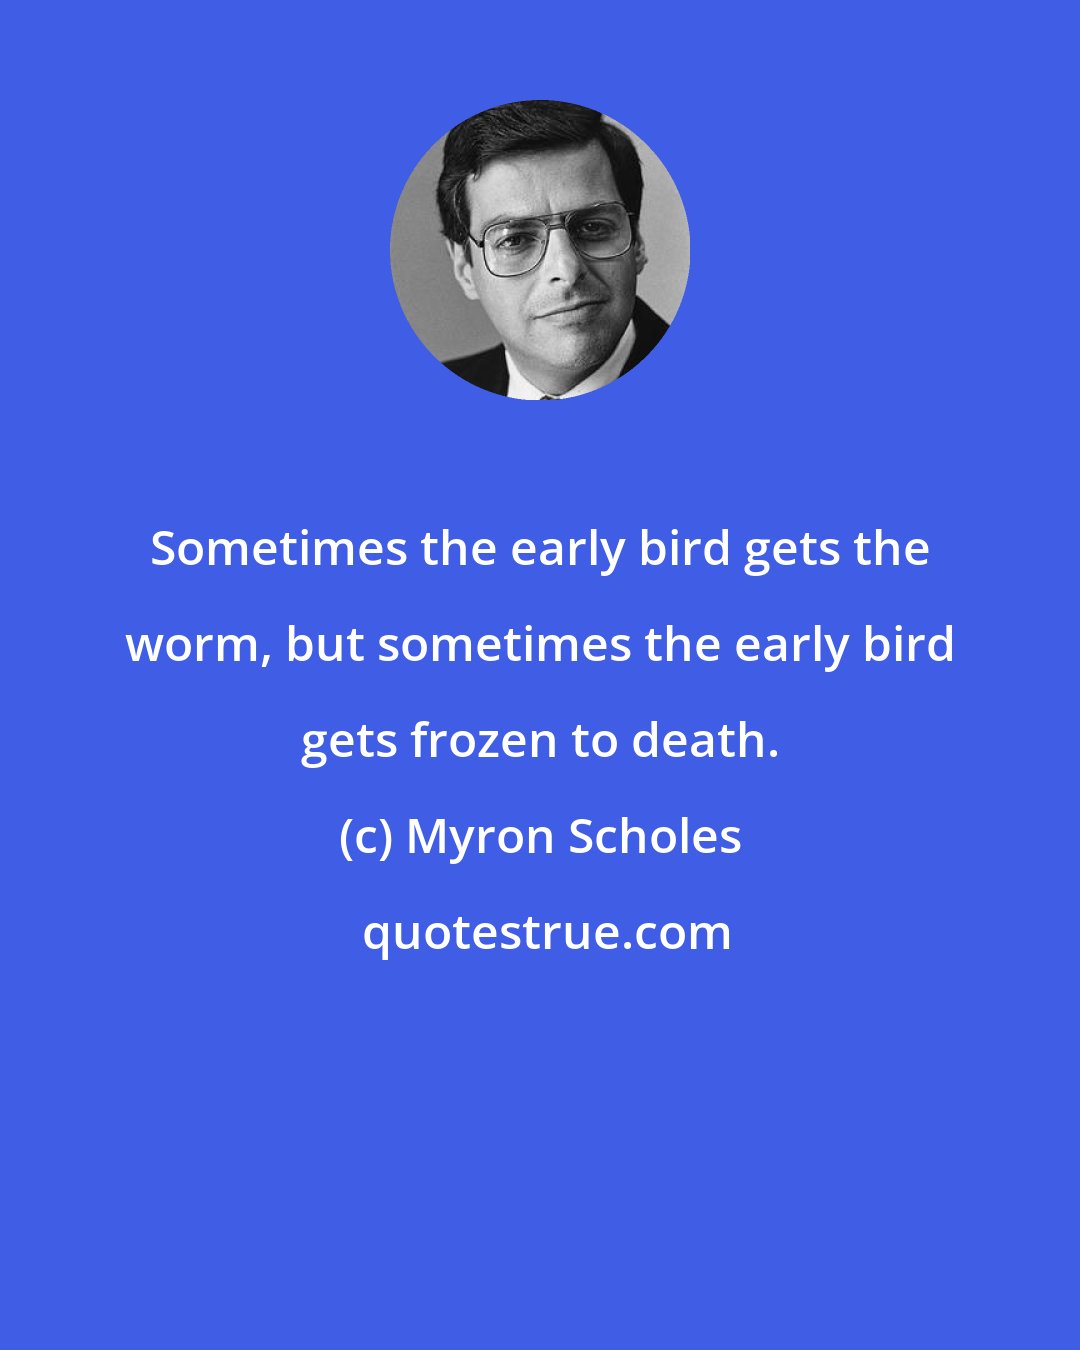 Myron Scholes: Sometimes the early bird gets the worm, but sometimes the early bird gets frozen to death.